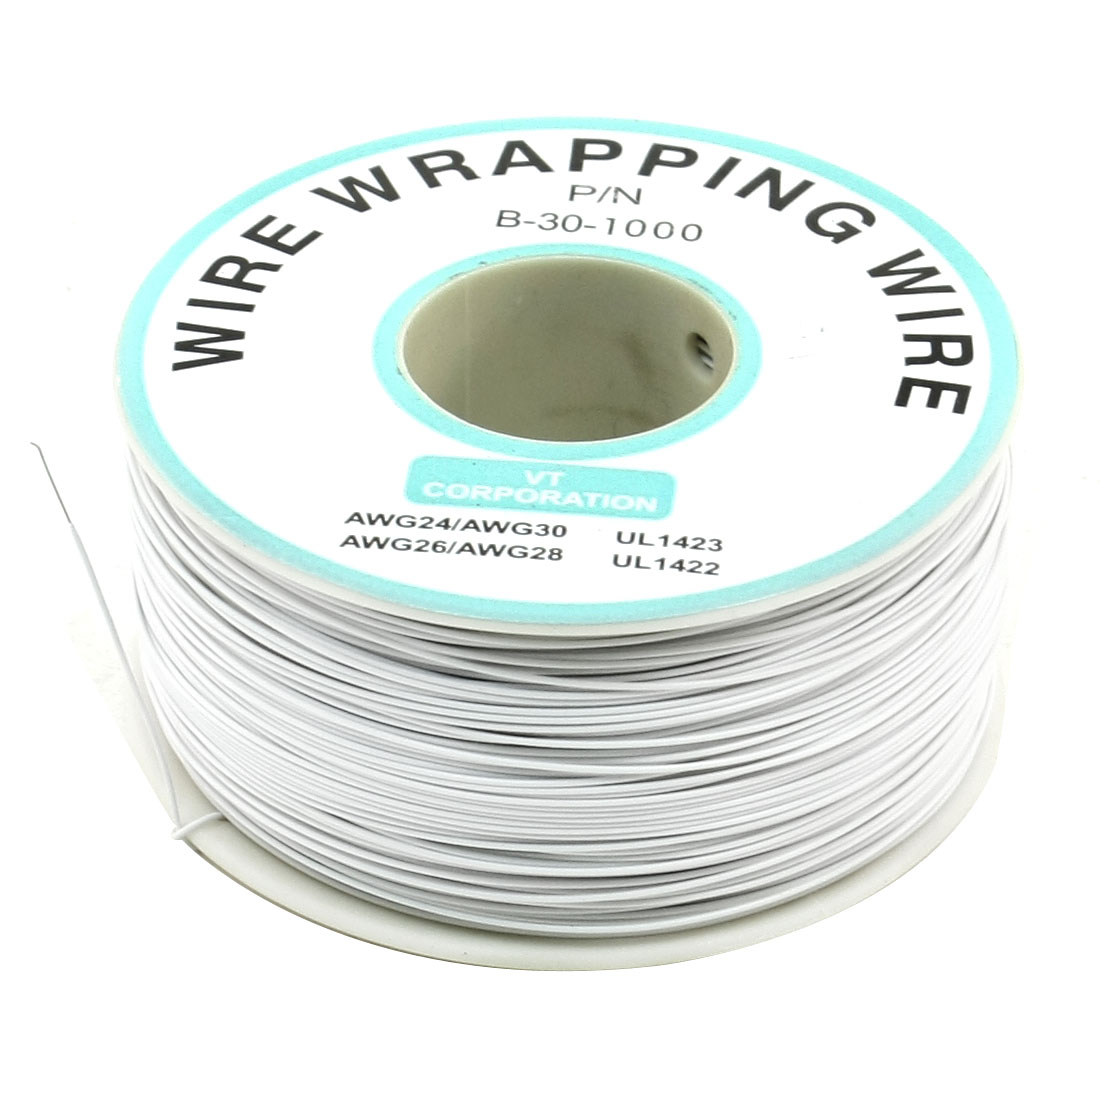 PCB Solder Flexible B-30-1000 30AWG Wire Cable Wrapping Wrap 200M White